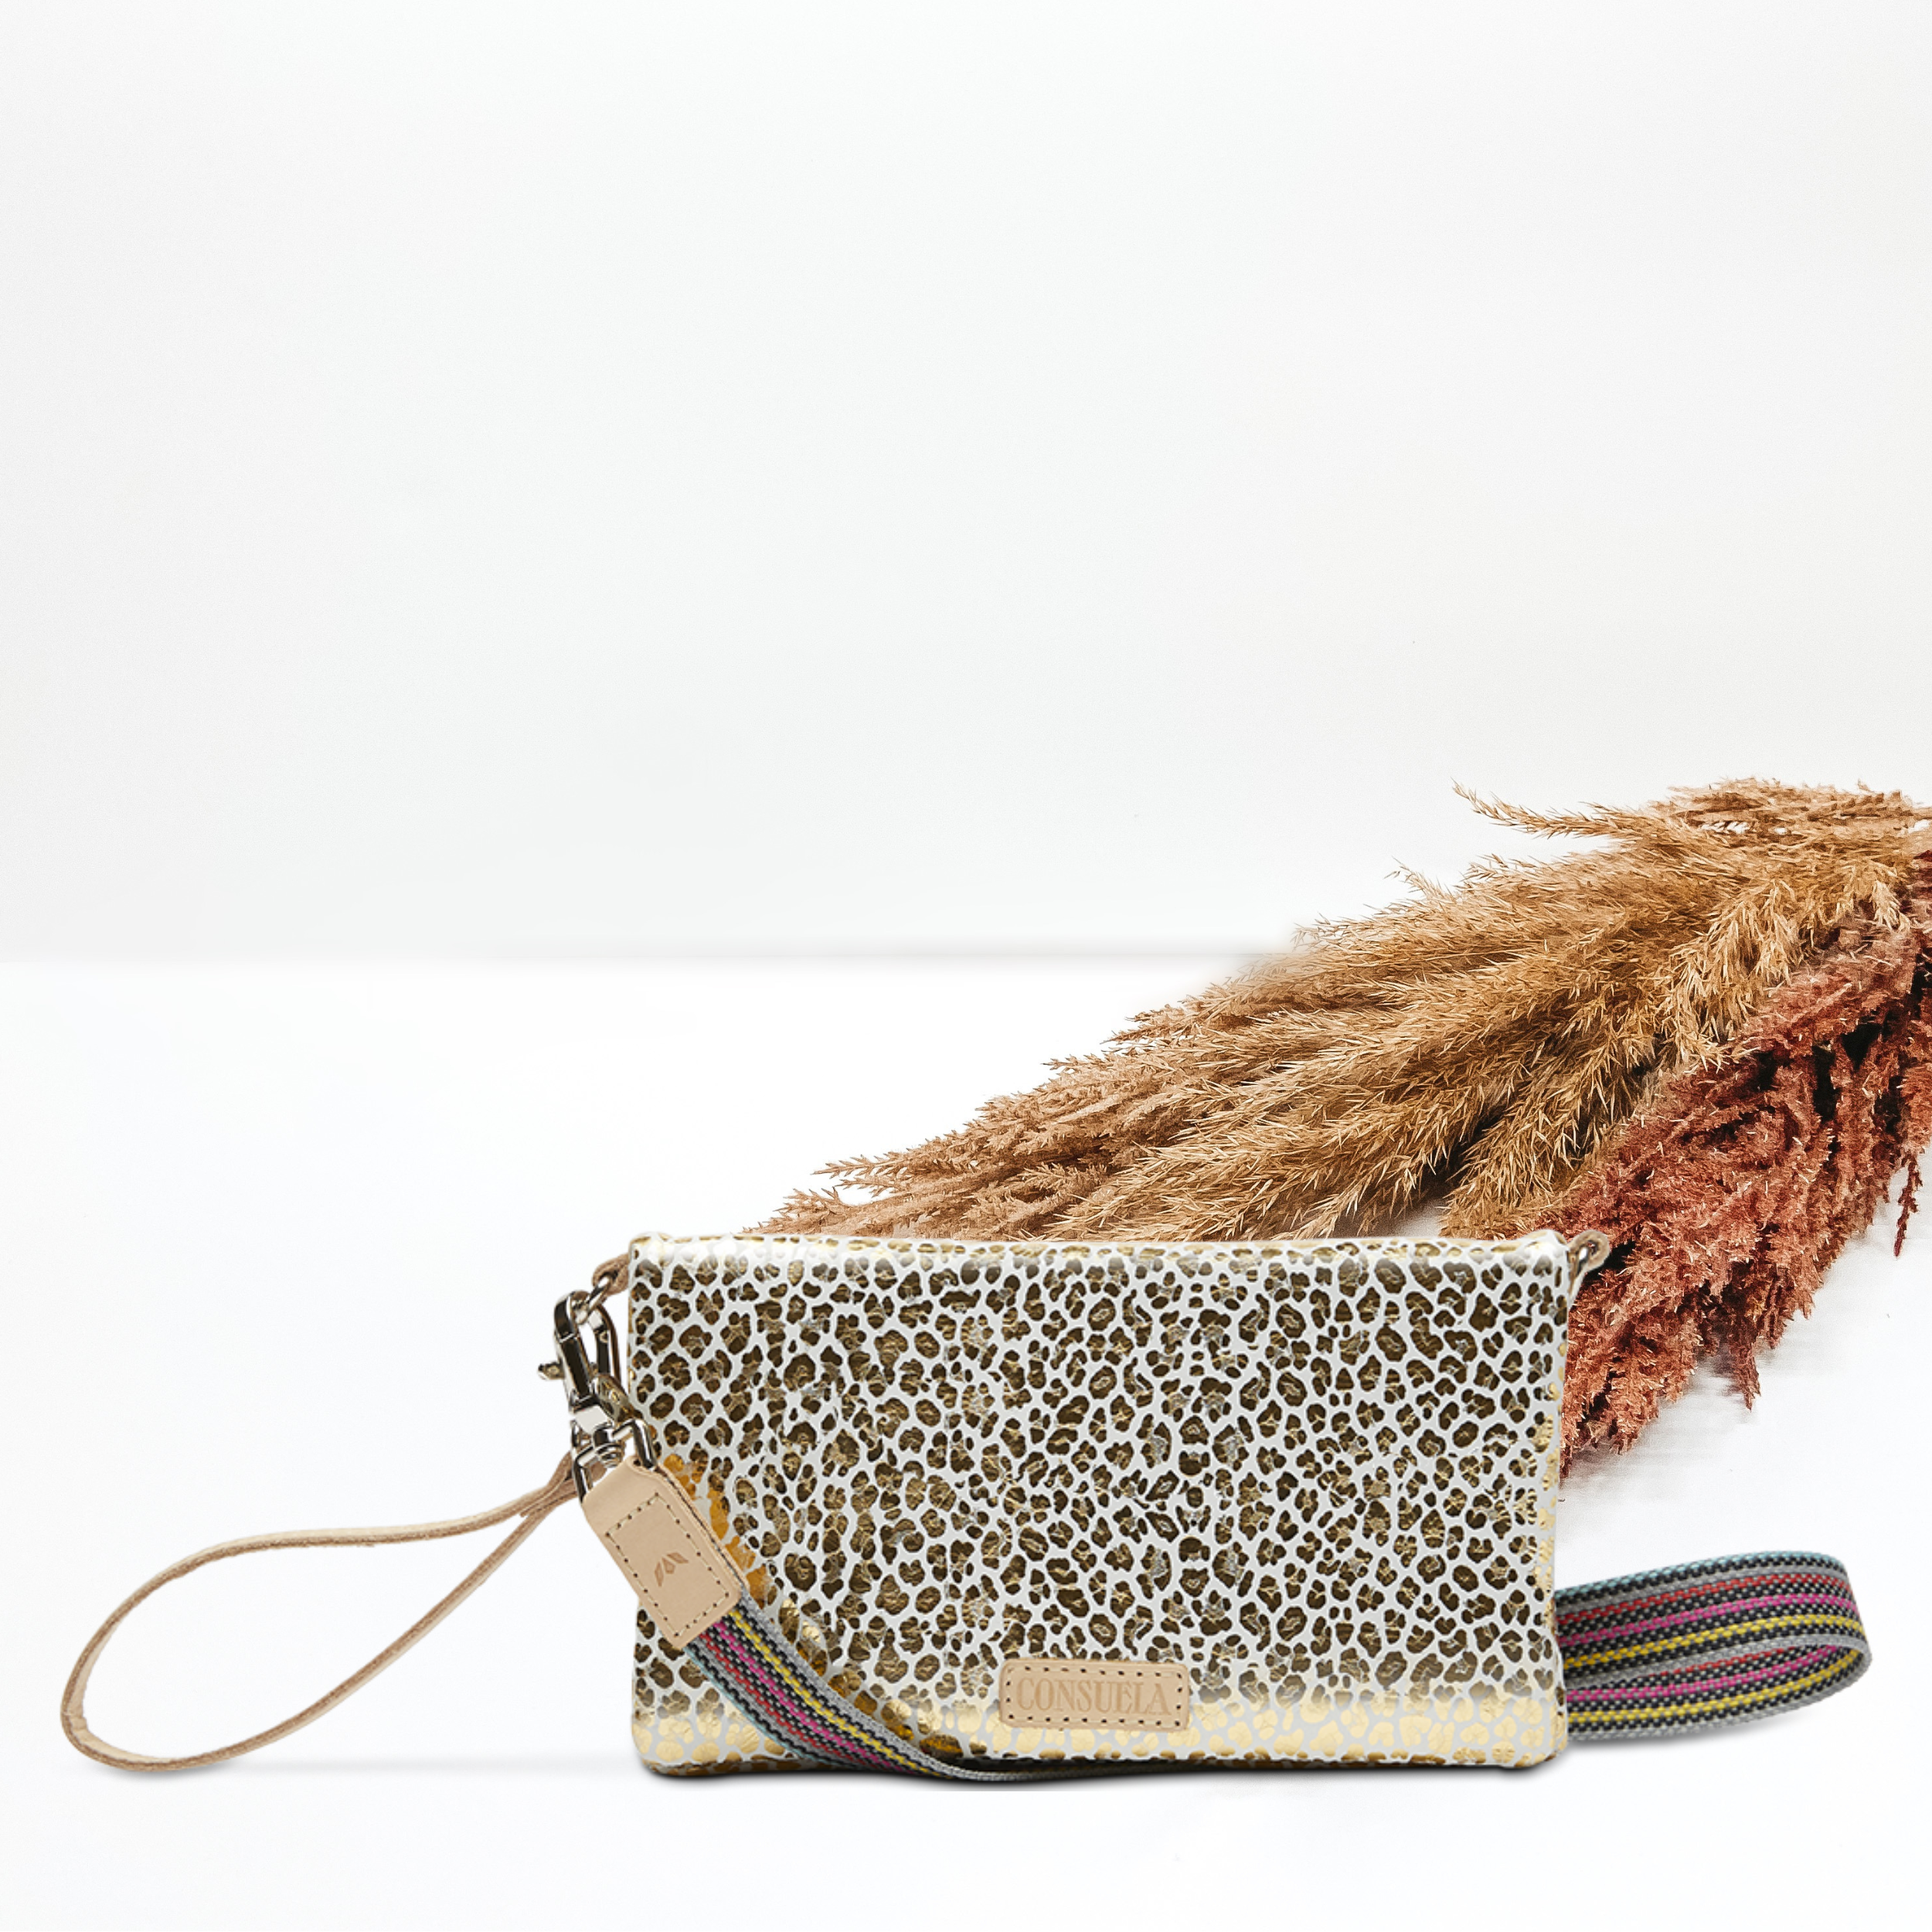 Pictured on a white background is an uptown corssbody purse with a light tan leather wristlet strap and a woven crossbody strap. This purse has a white with a metallic gold leopard print design. 